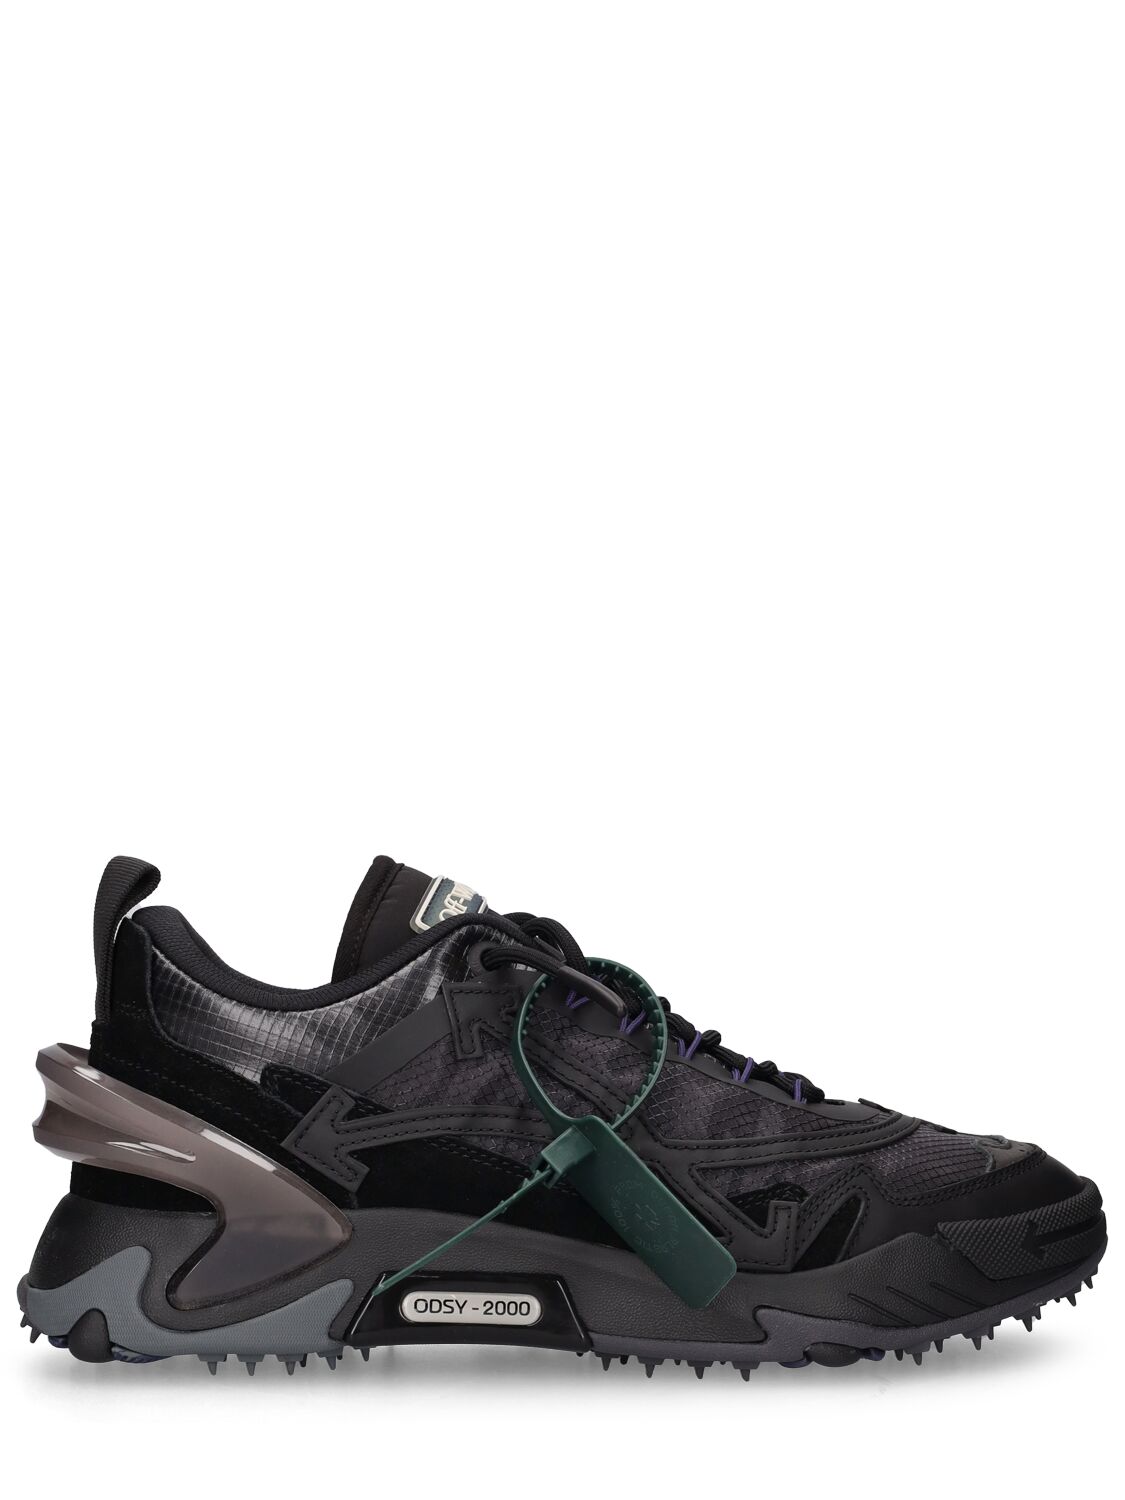 Shop Off-white Odsy-2000 Sneakers In Black